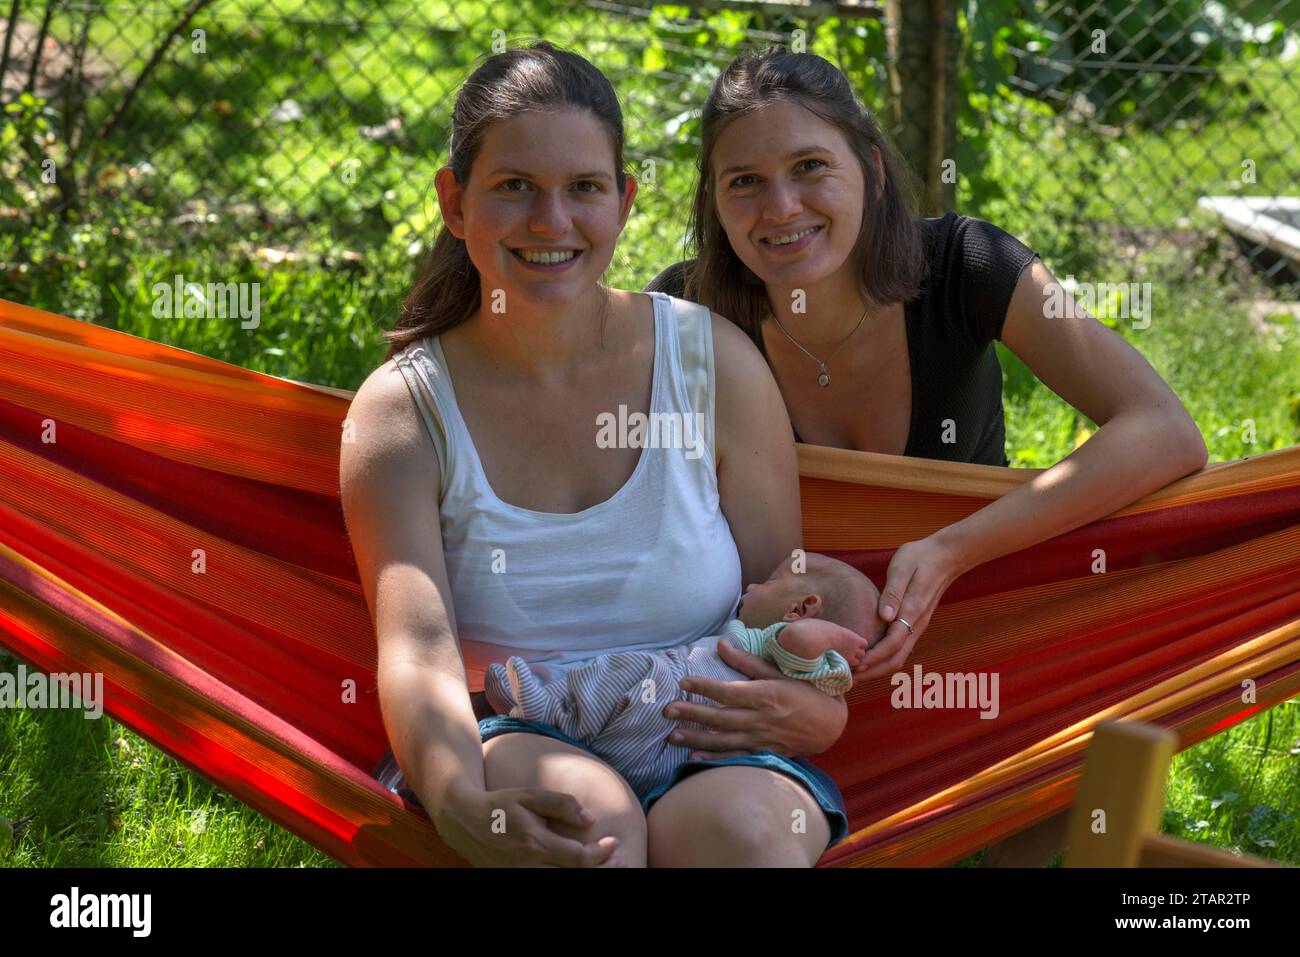 Young mother with baby in a hammock in the garden, her sister in the background, Mecklenburg-Vorpommern, Germany Stock Photo